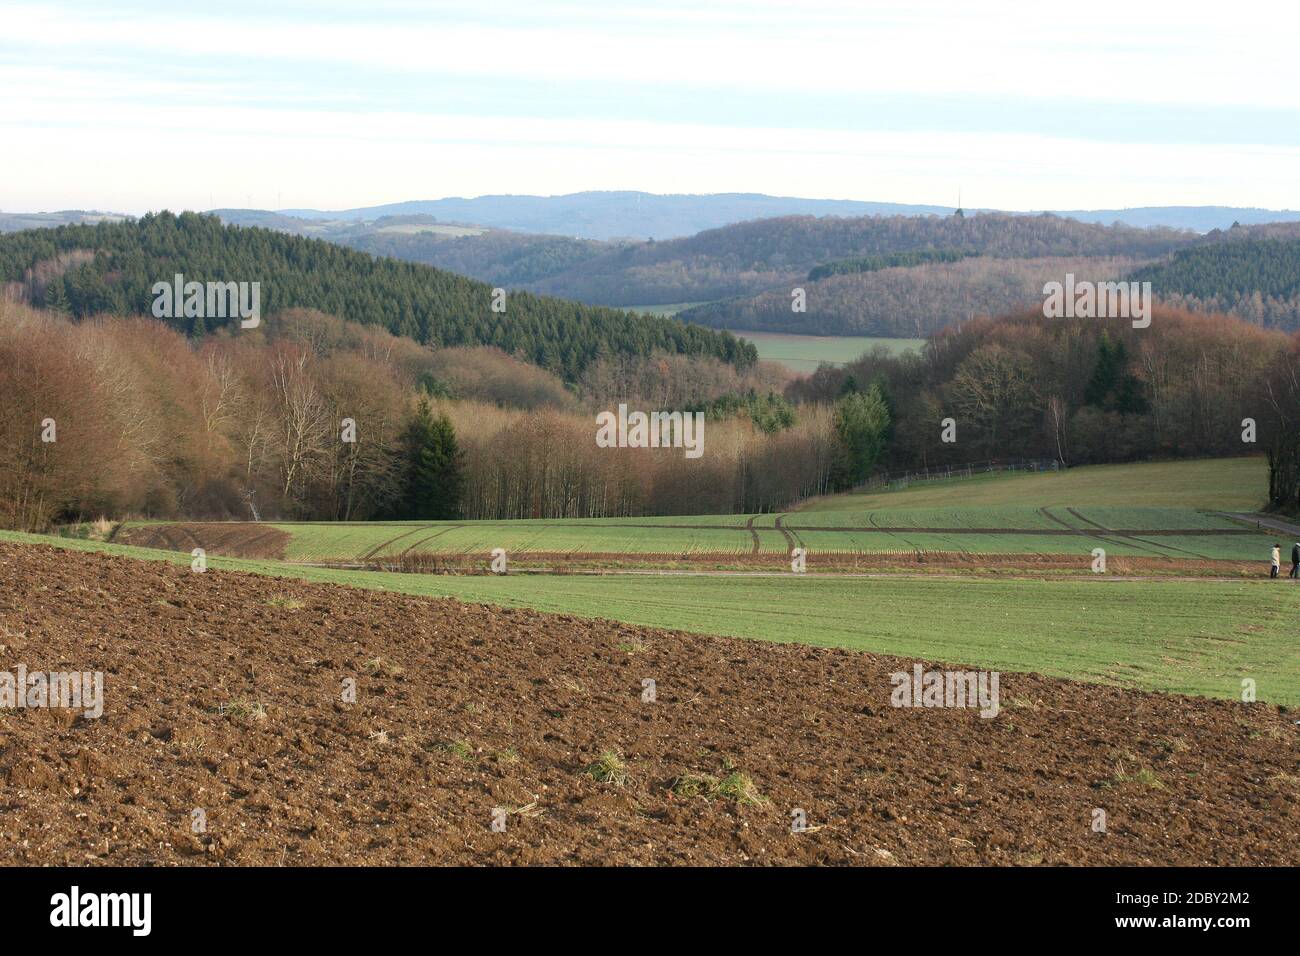 A landscape with wheat fields and forest Stock Photo